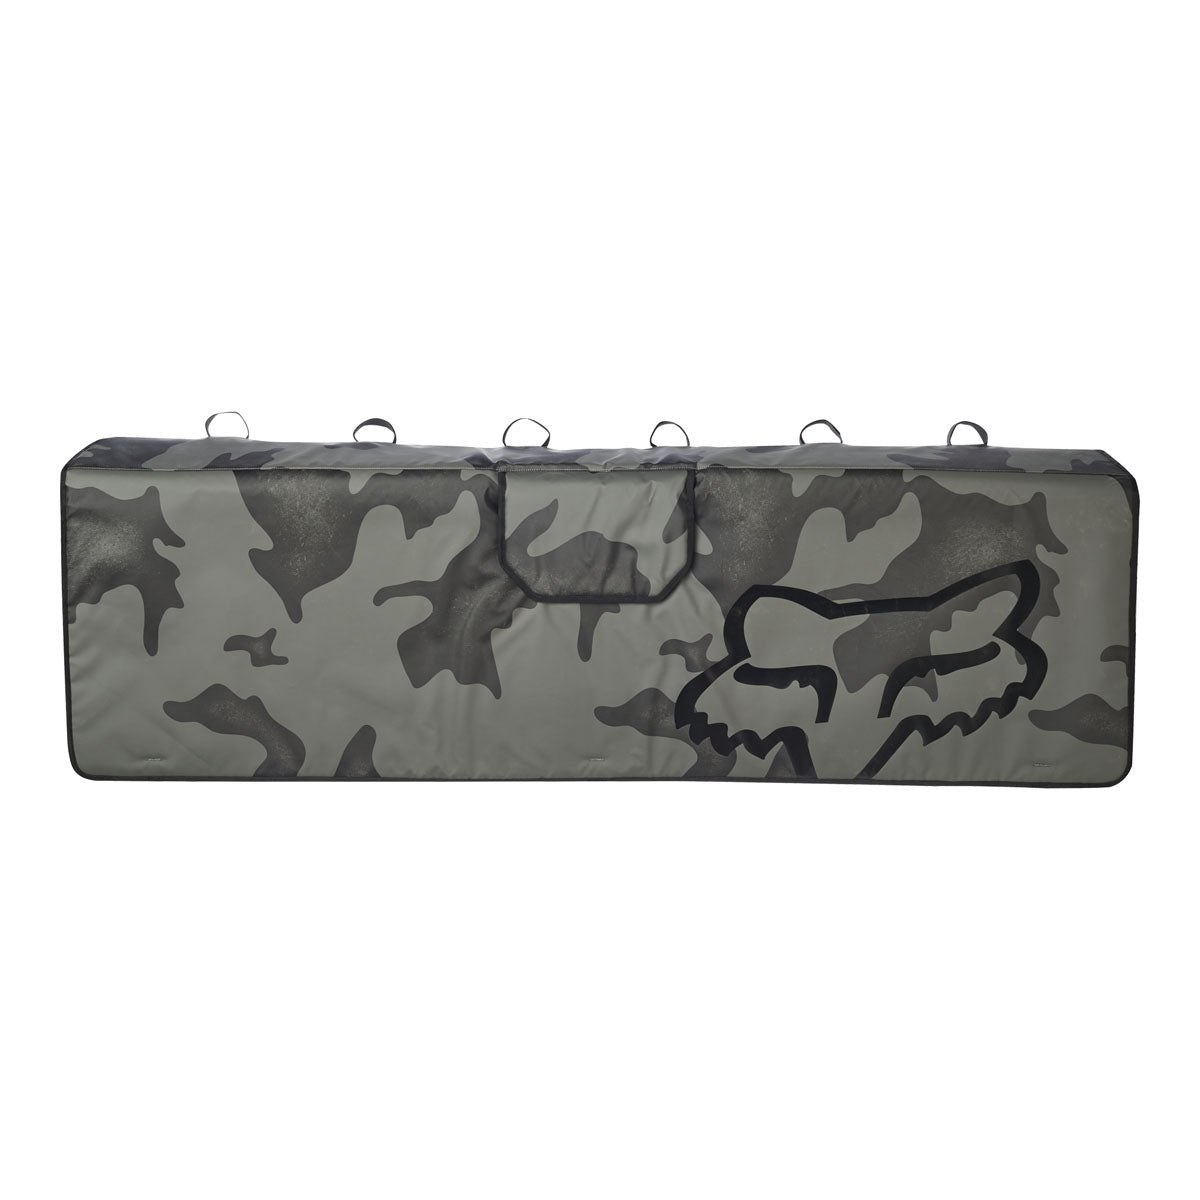 Fox Racing Large Camo Tailgate Cover - 